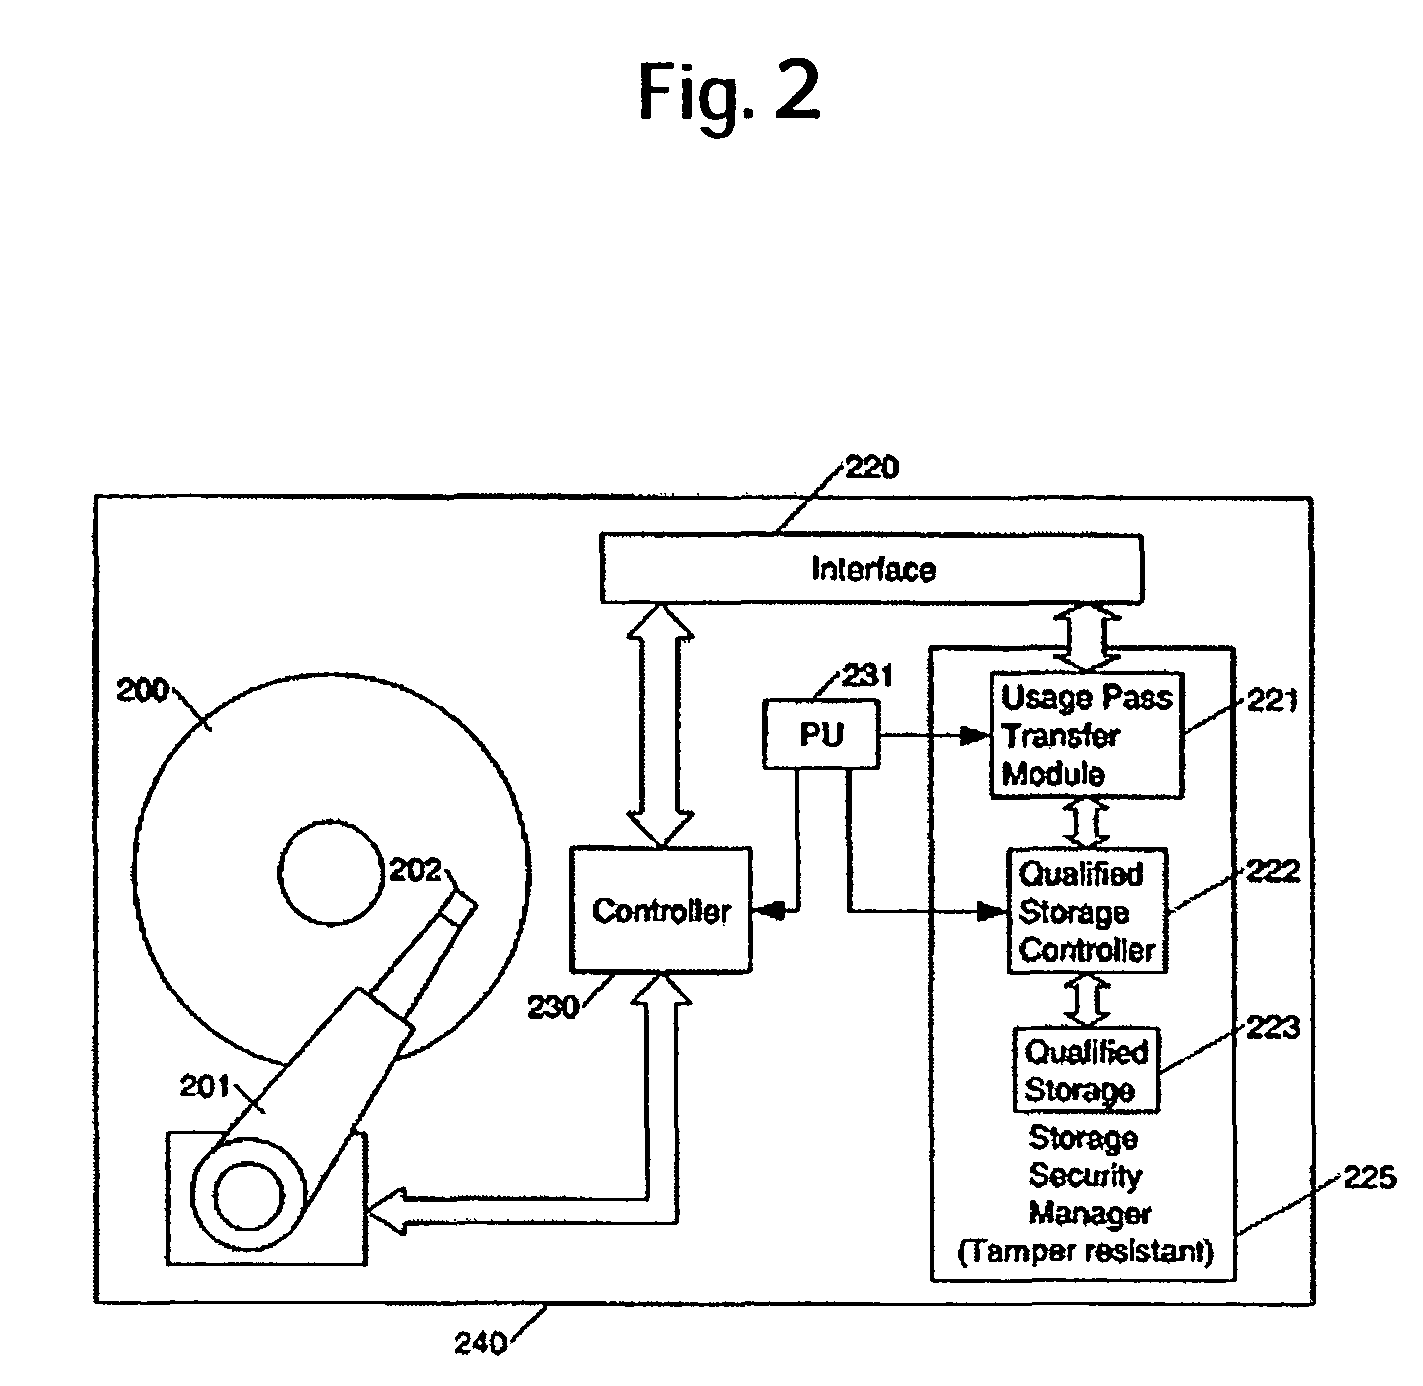 System and device for managing control data